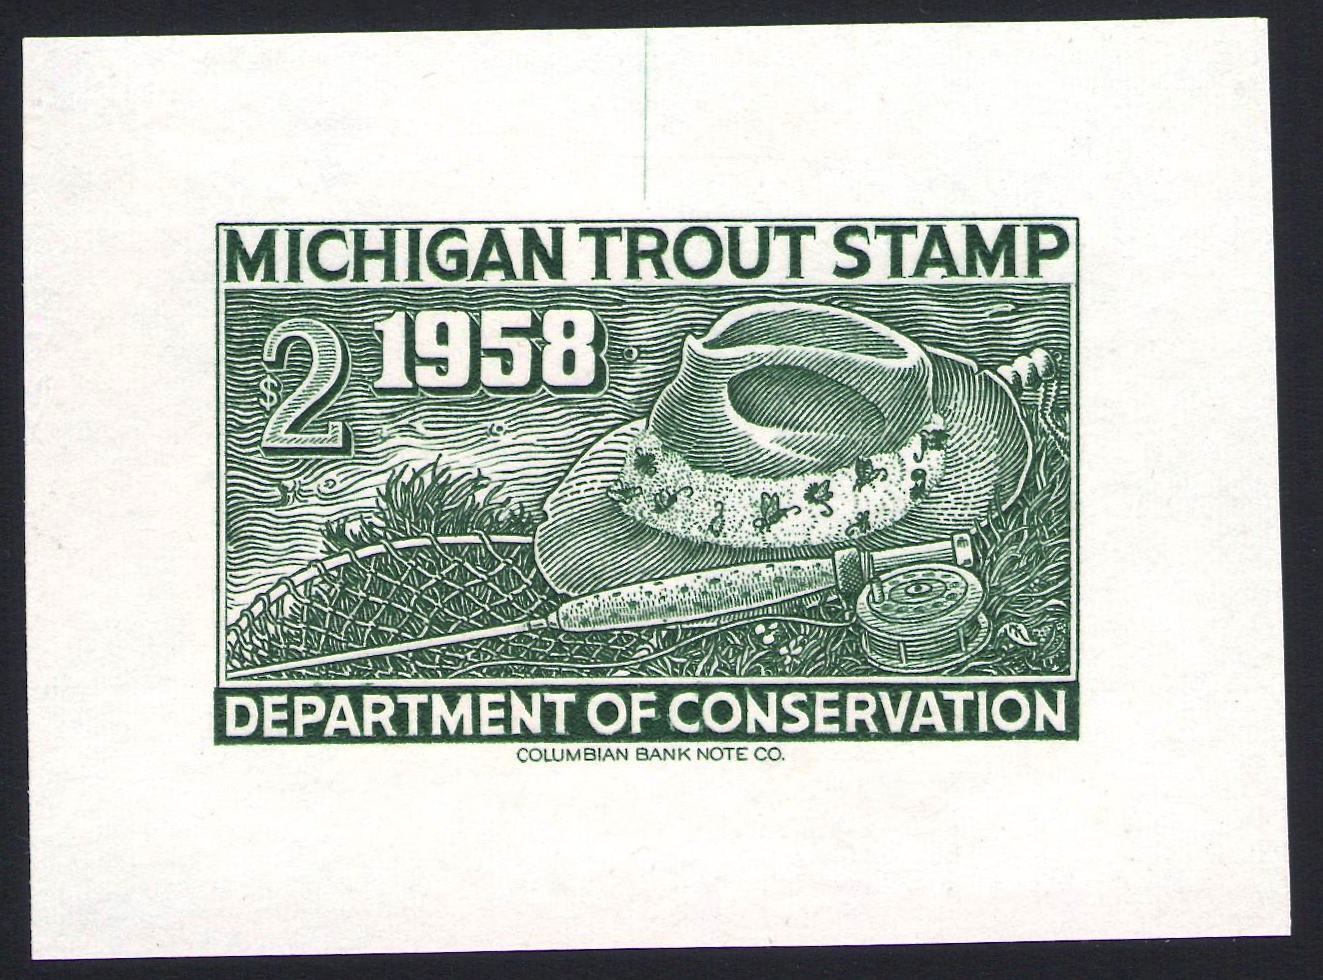 1958 Trial Color Large Die Proof Michigan Trout